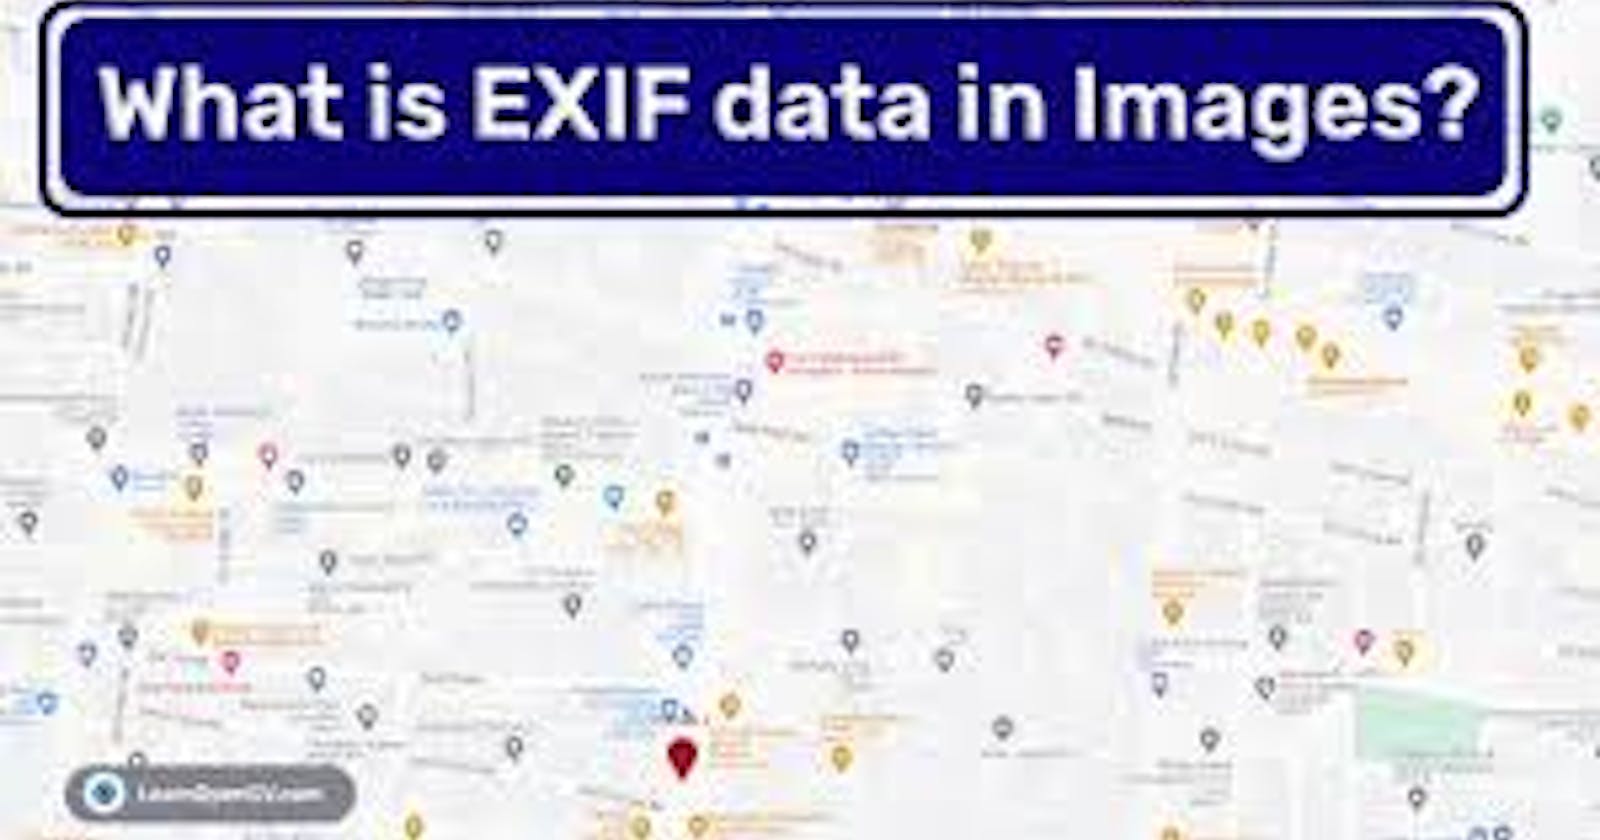 What Are Exif Data?